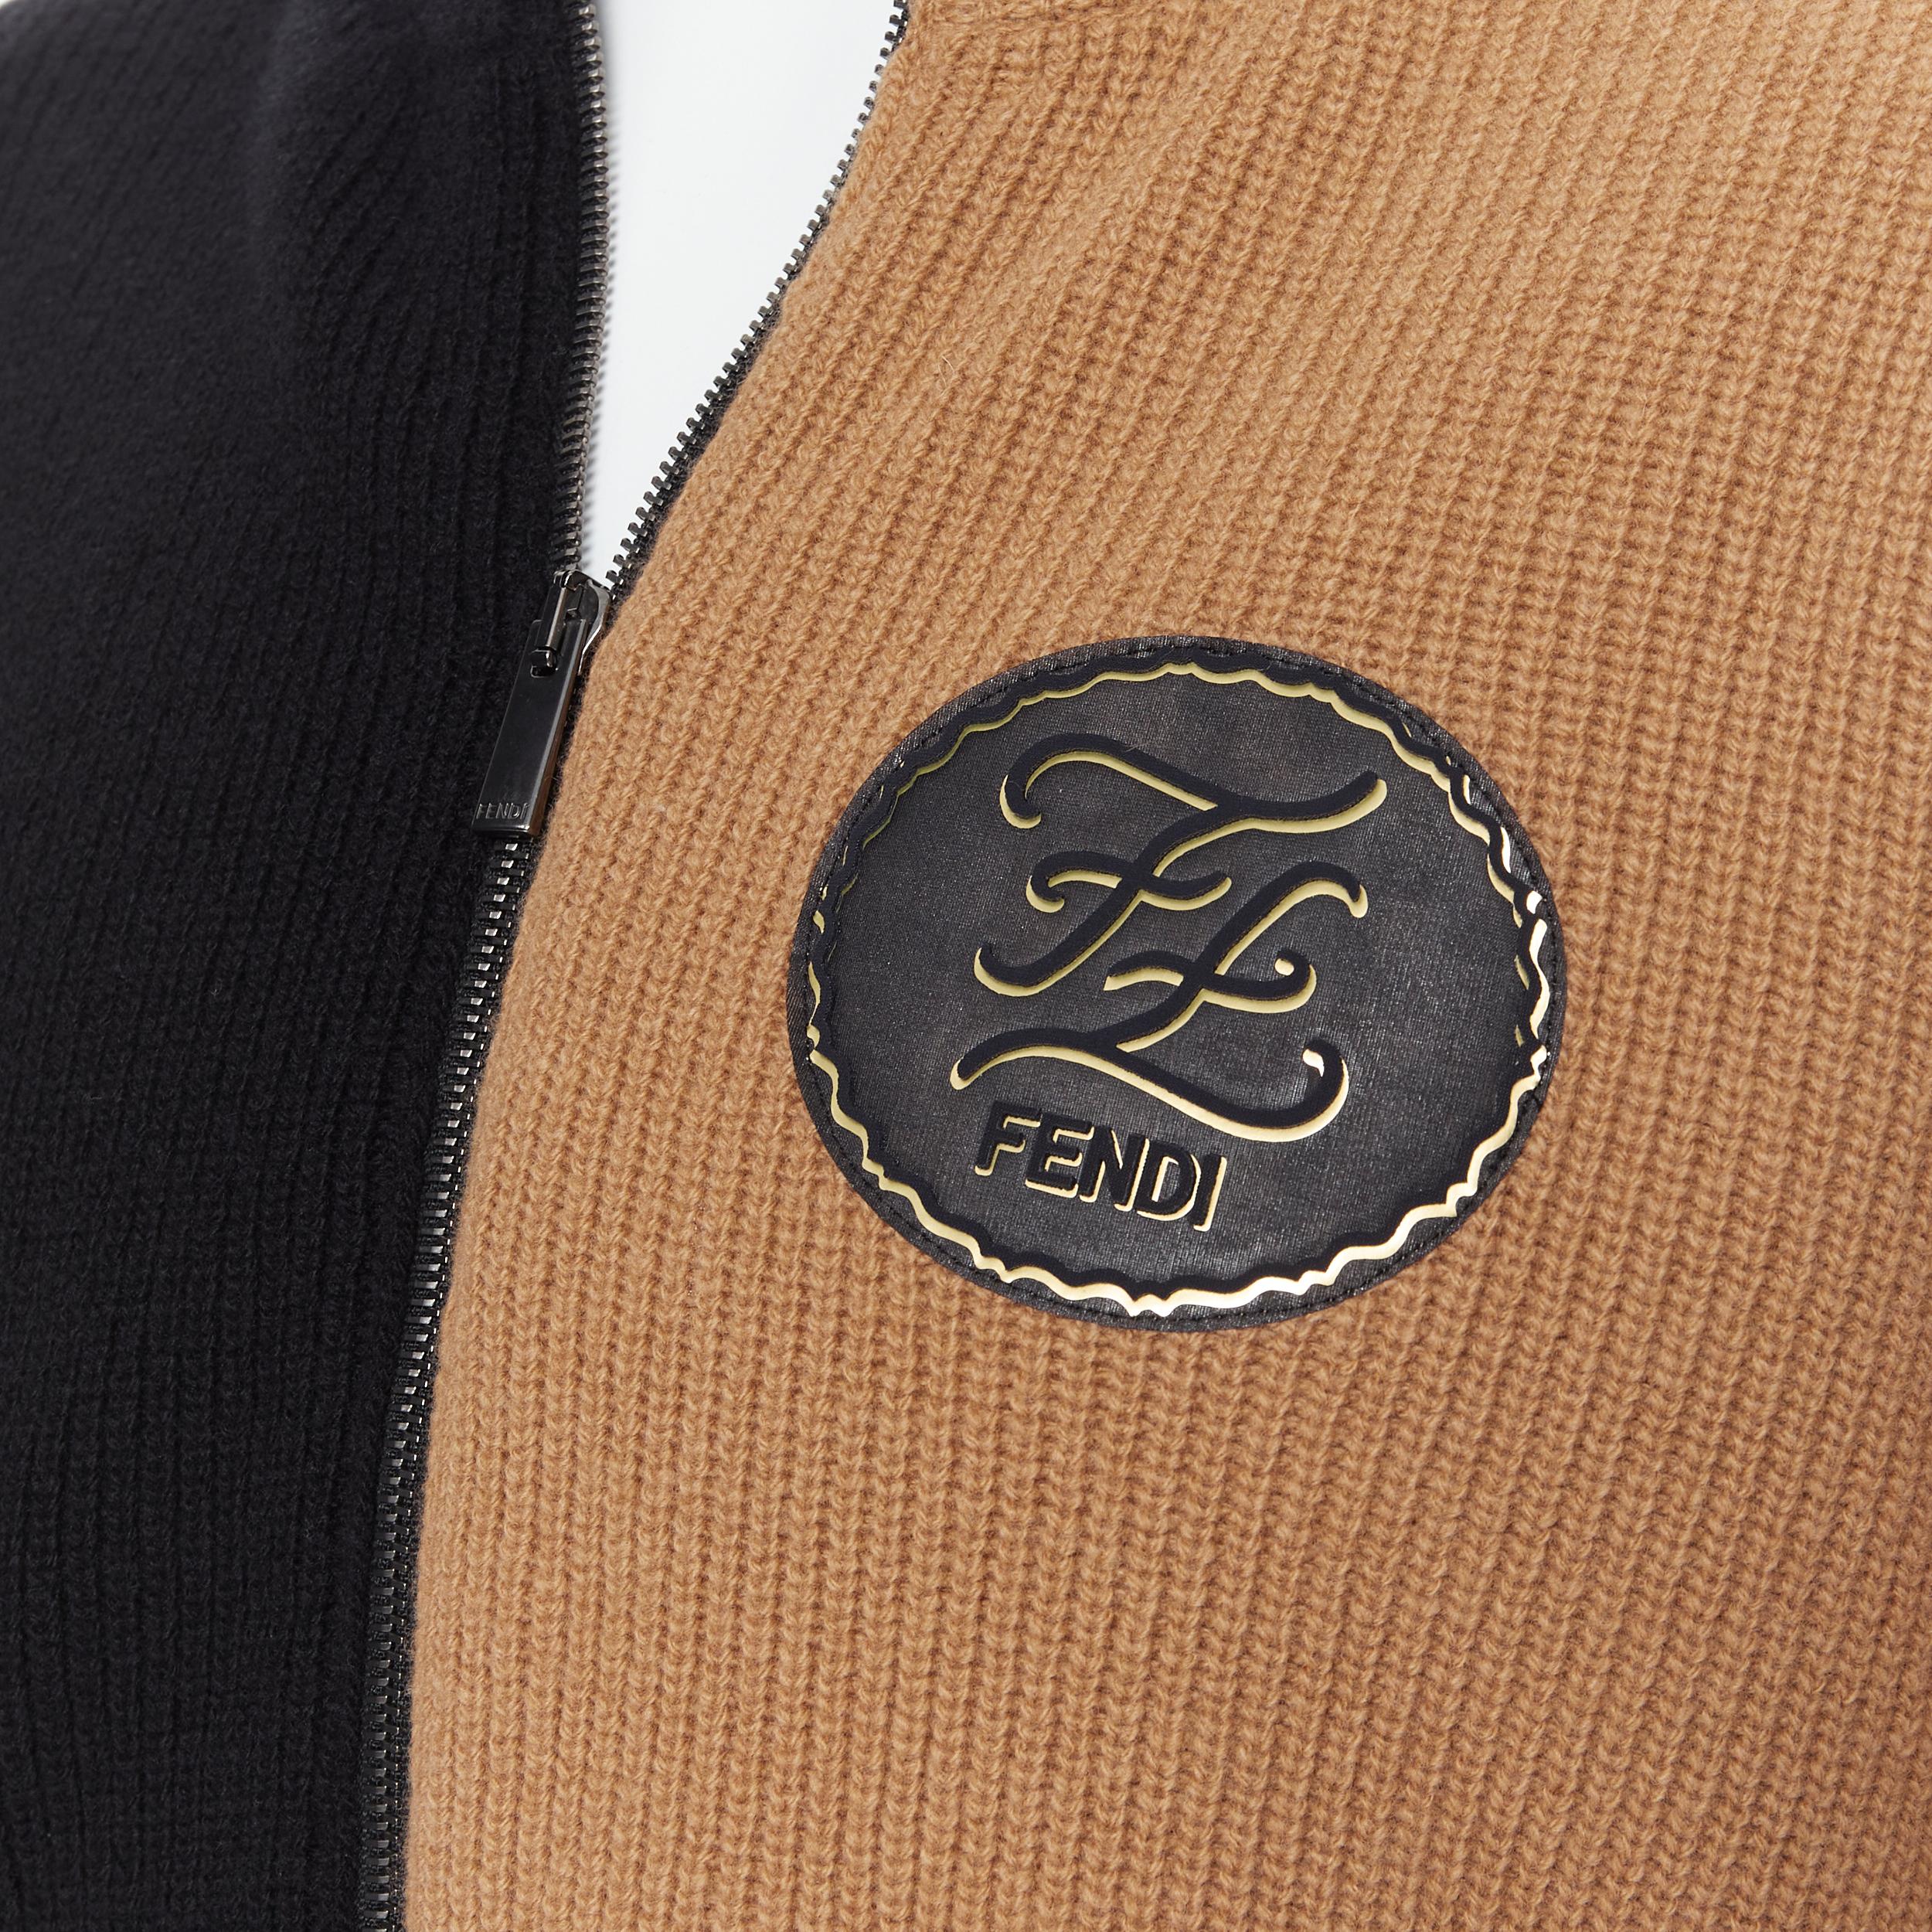 new FENDI 2019 Runway 100% wool FF logo black brown bi-colour zip cardigan S 
Reference: TGAS/B00353 
Brand: Fendi 
Collection: 2019 Runway 
Material: Wool 
Color: Brown 
Pattern: Solid 
Closure: Zip 
Extra Detail: Black camel brown mismatched